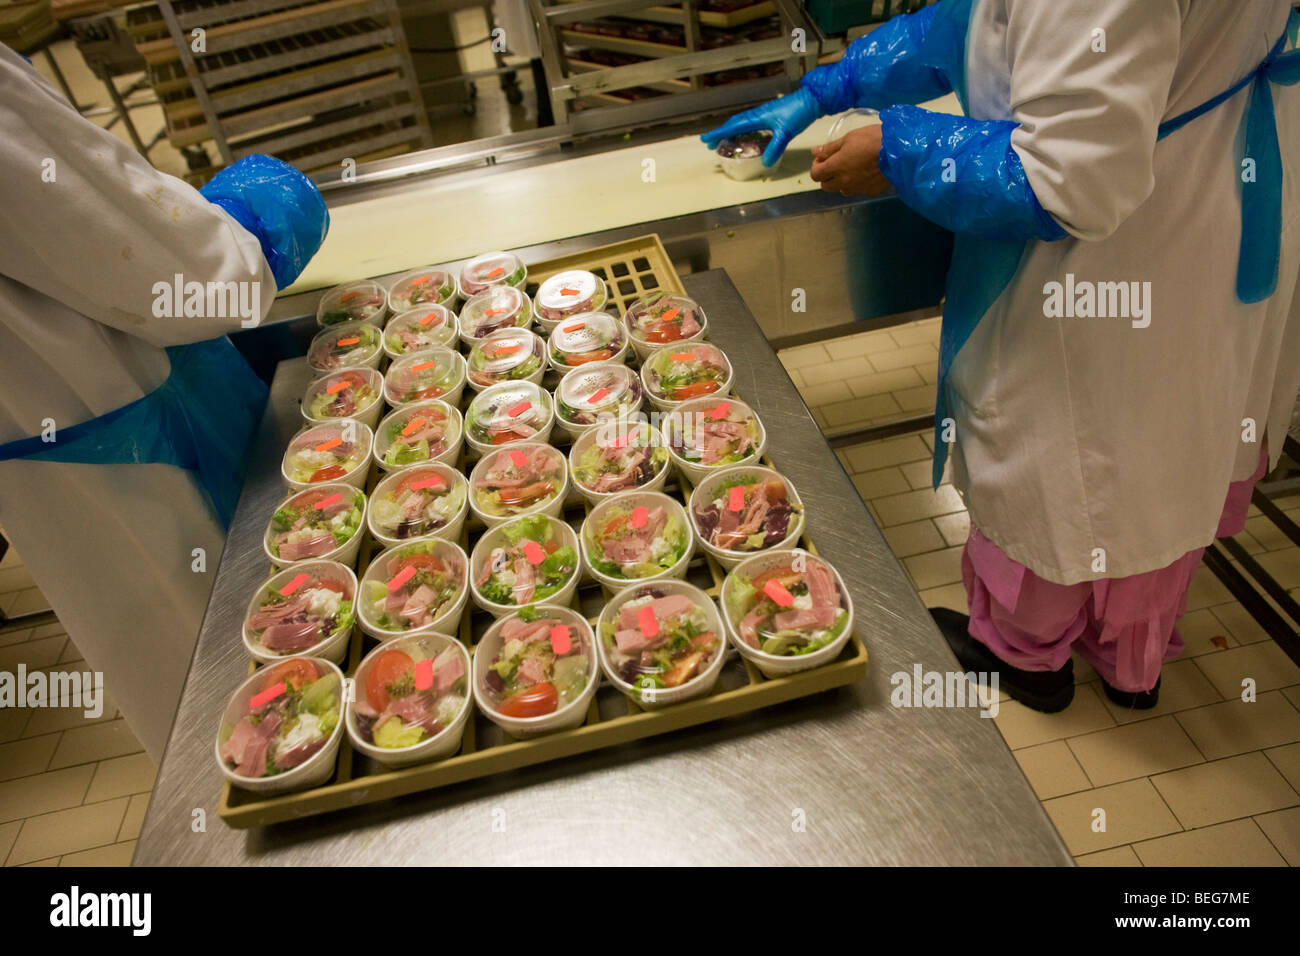 Female Employees Prepares Salads Destined For Airline Meals By Gate Stock Photo Alamy